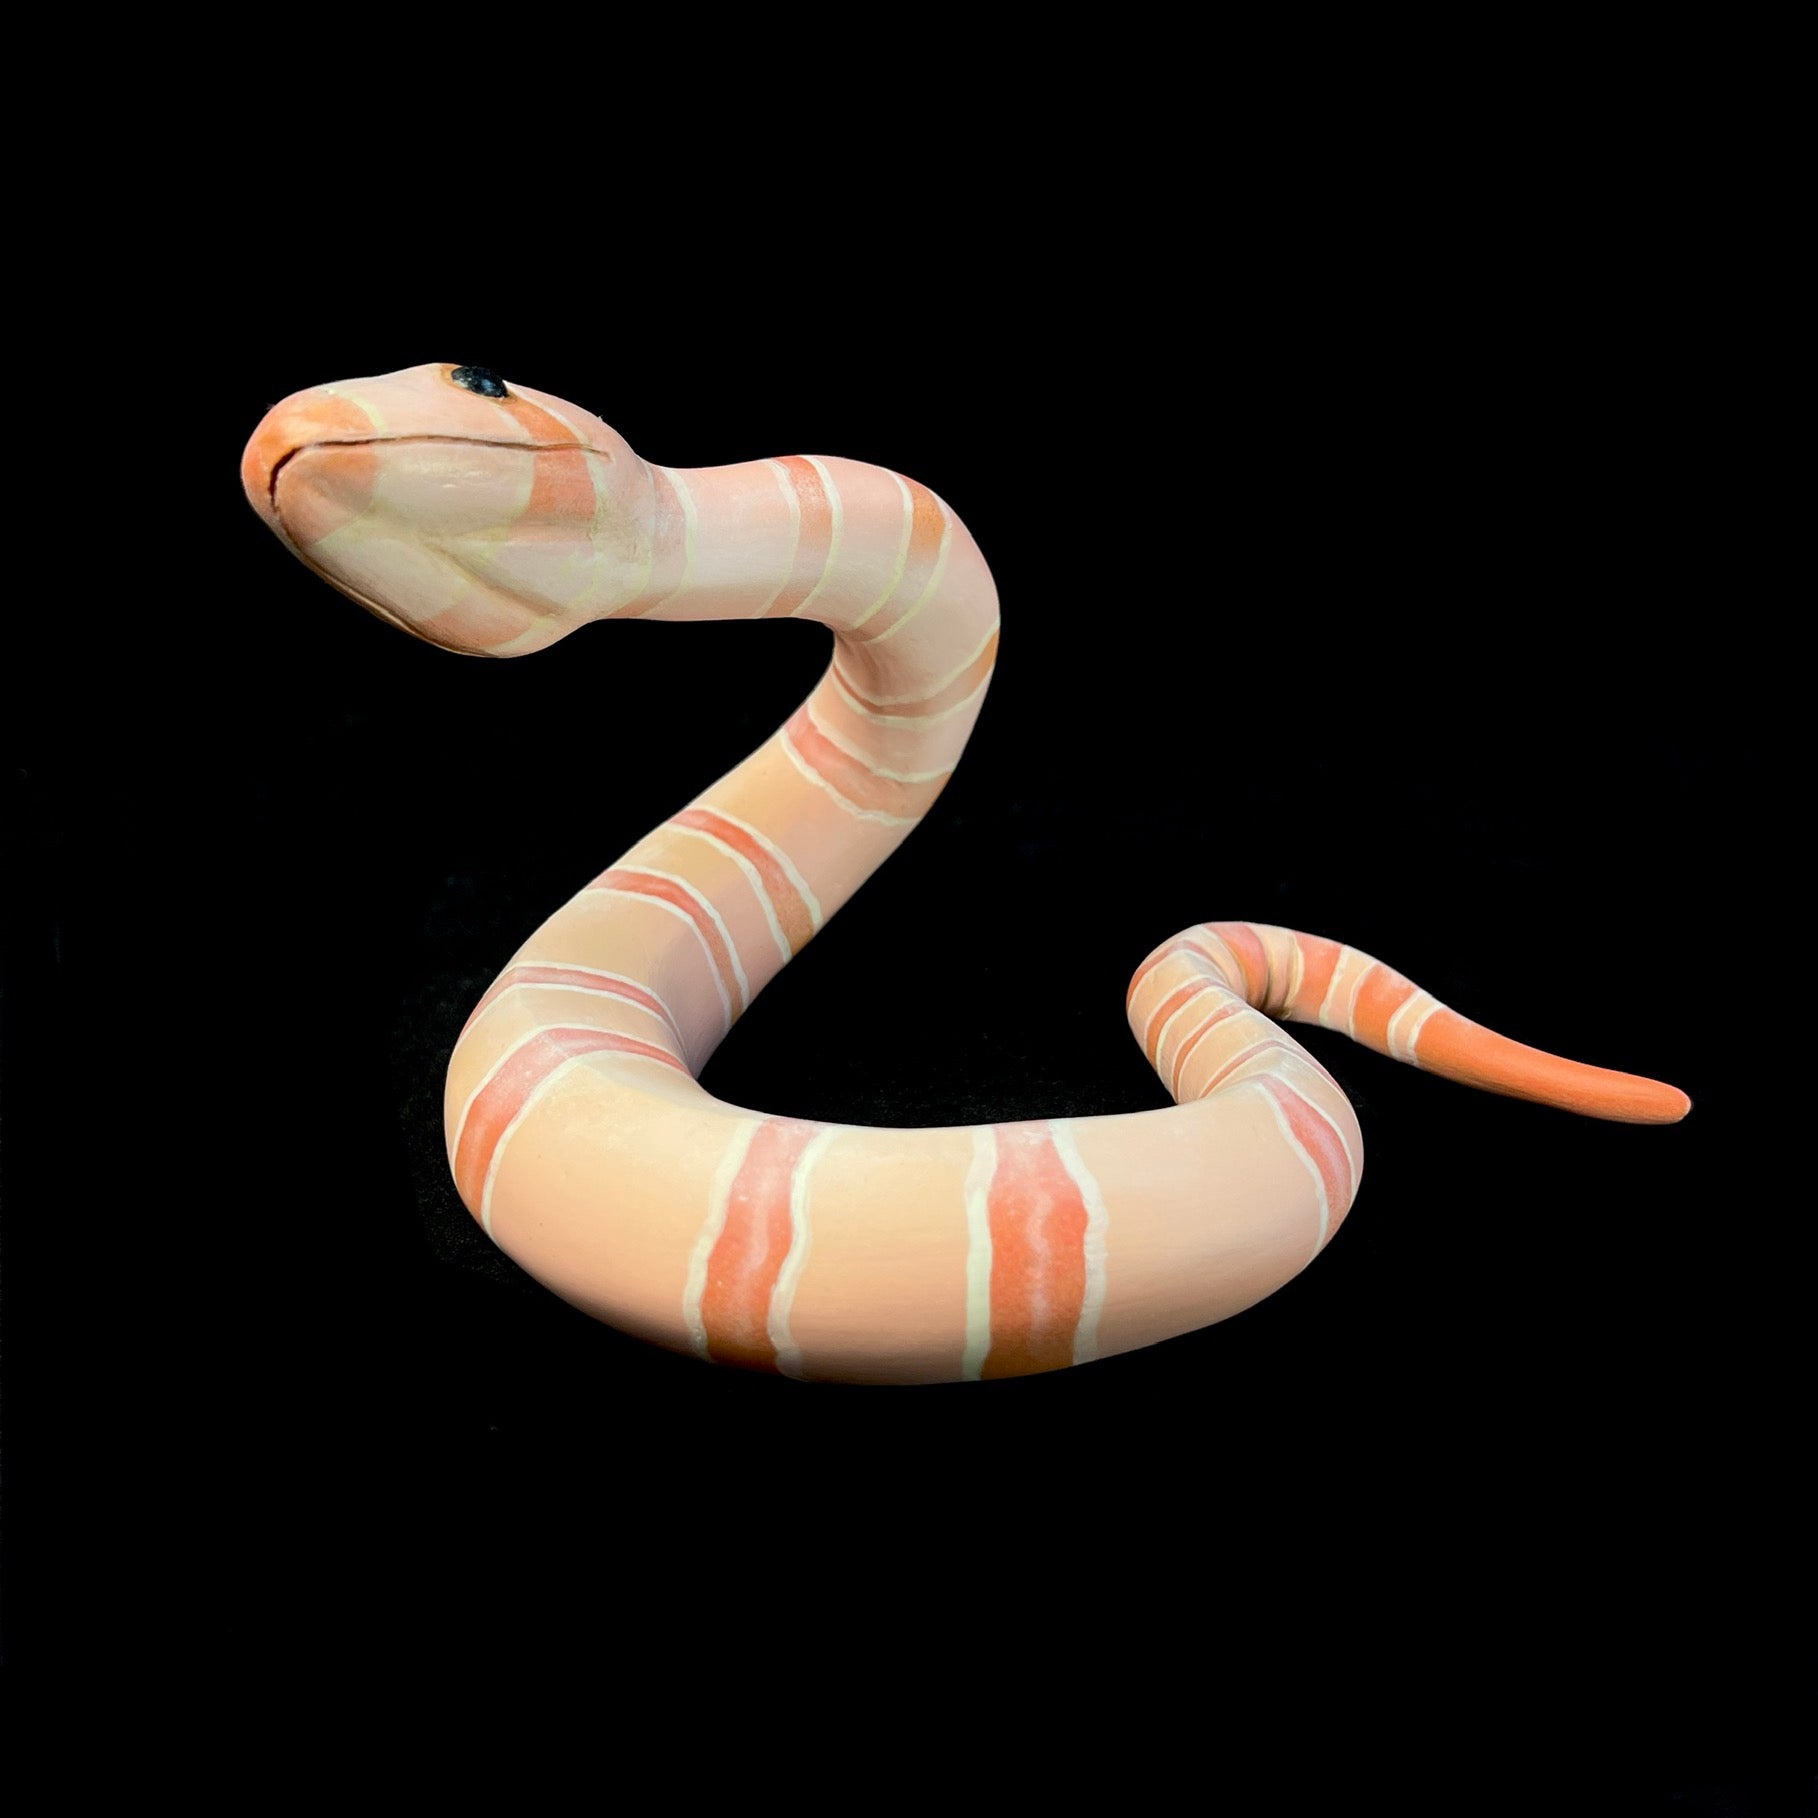 Bottom view of snake showing head detail and standing depth 